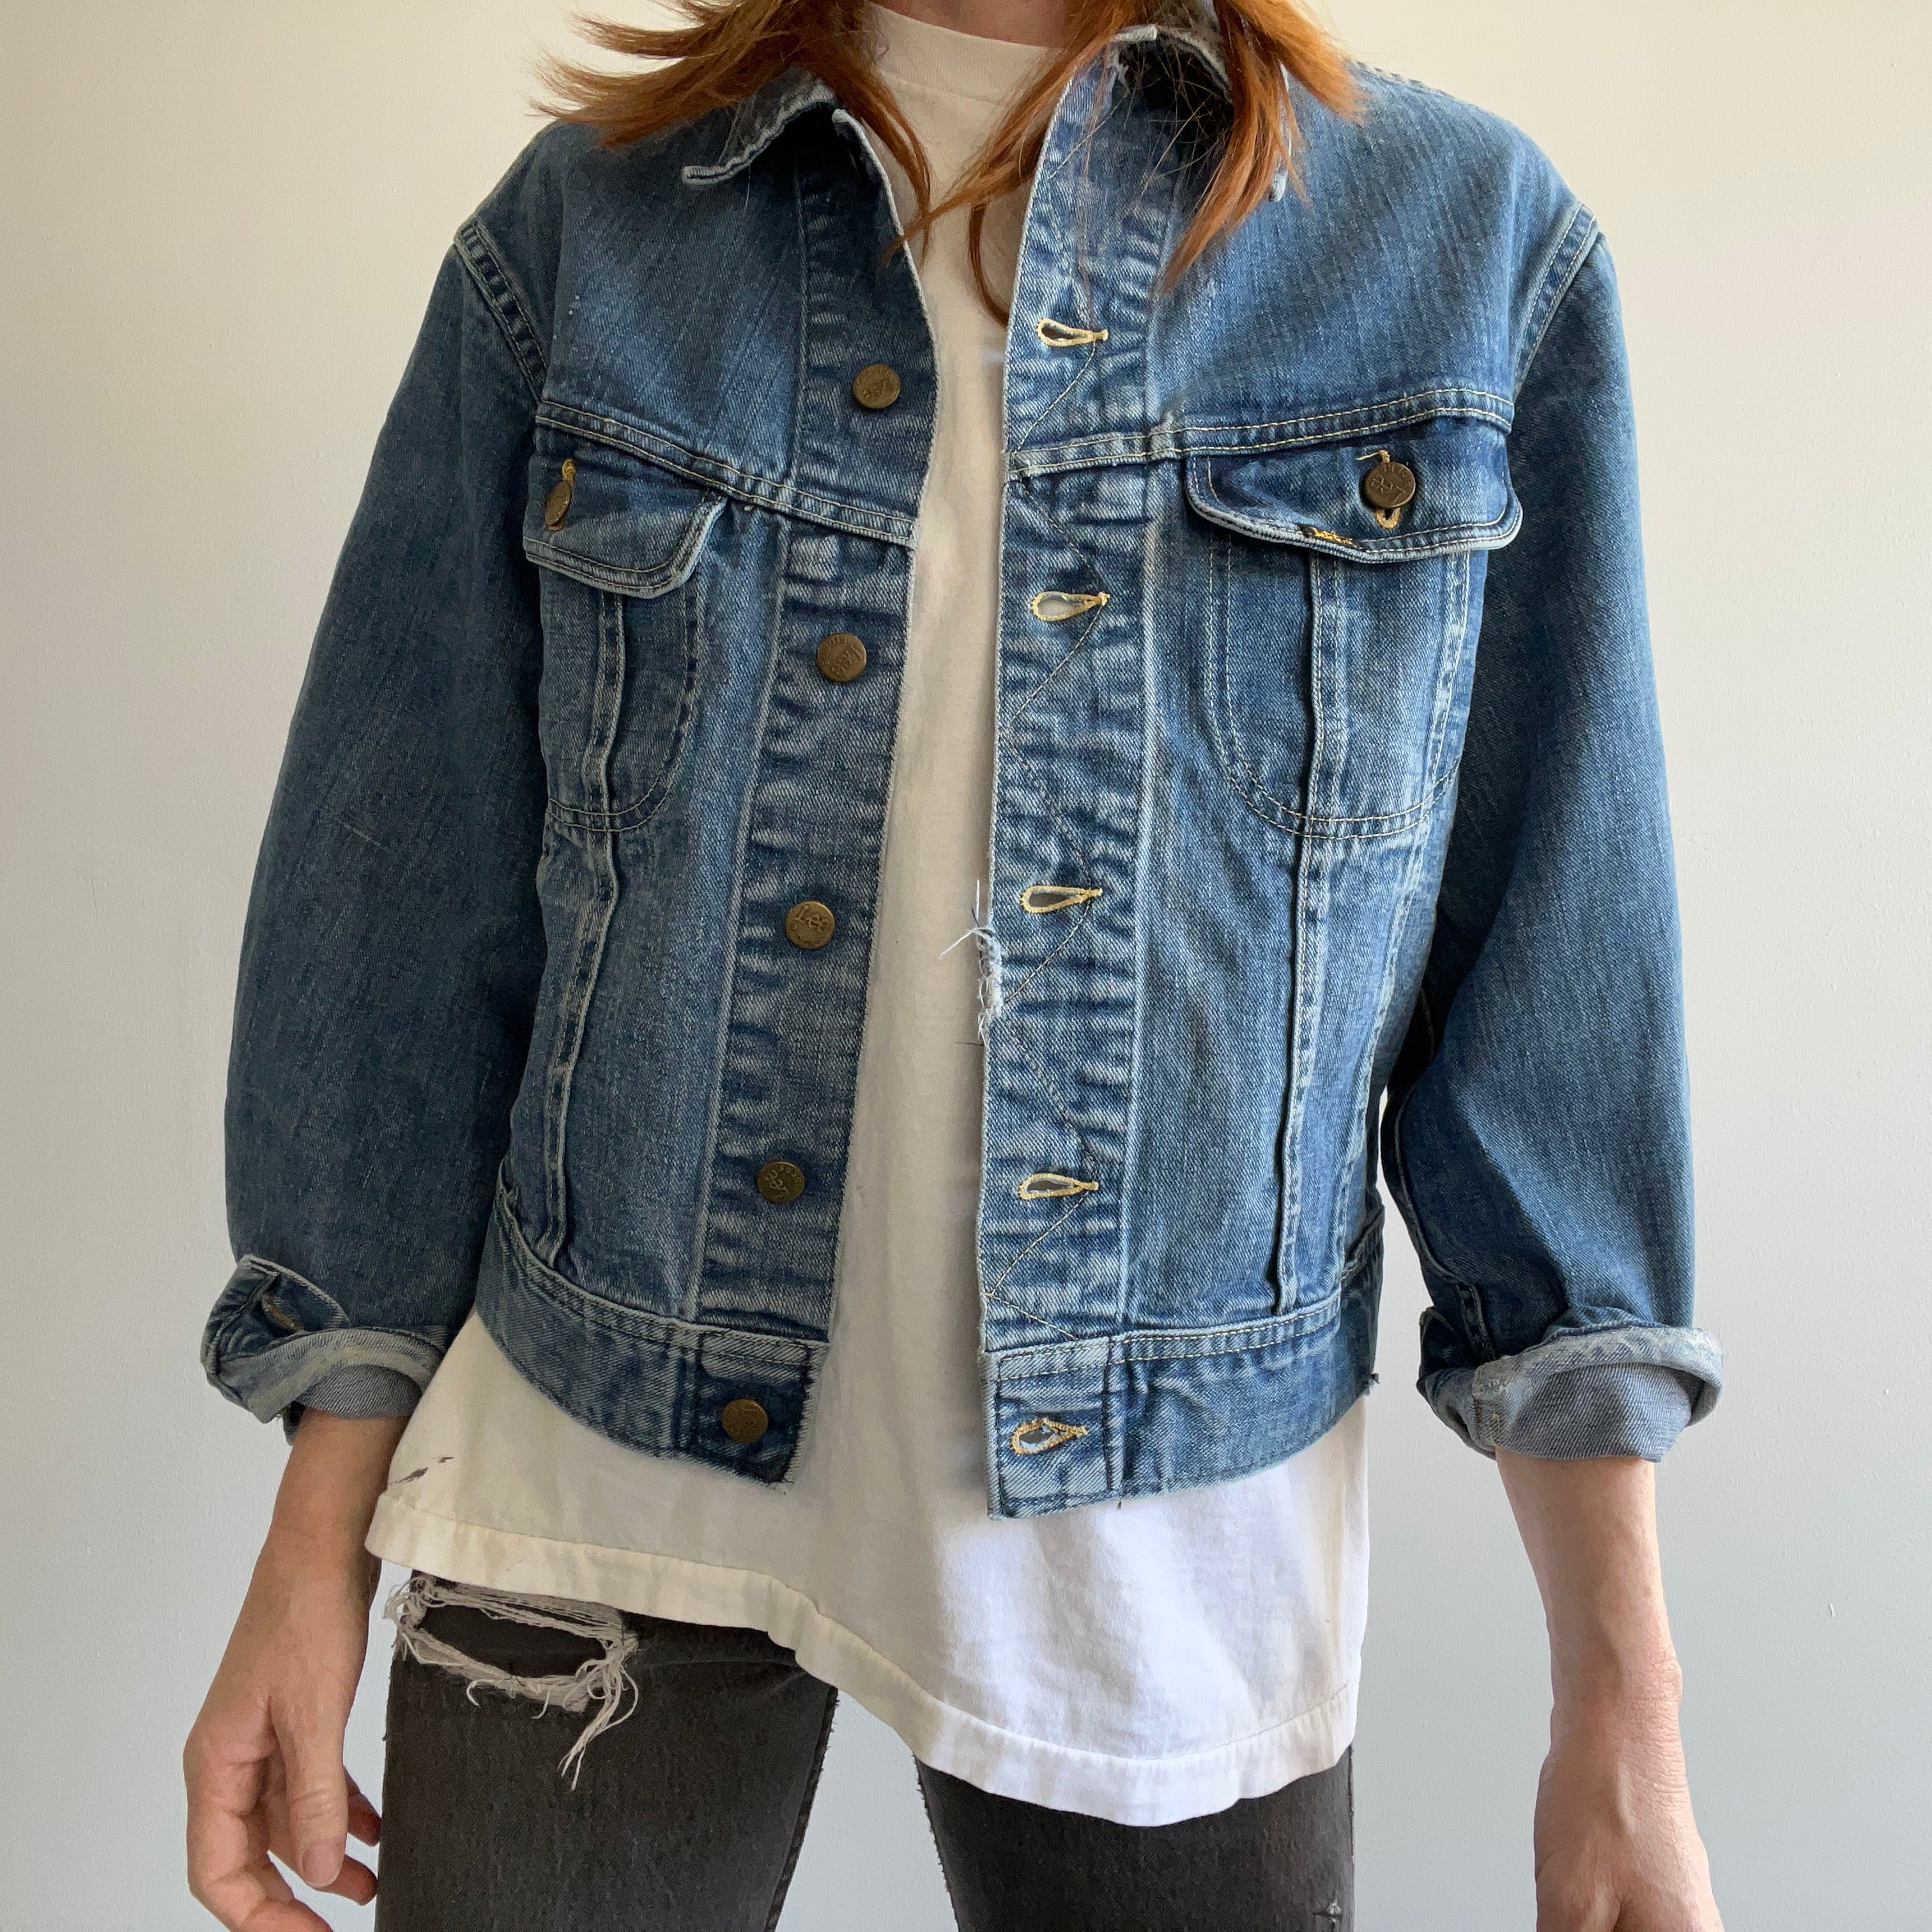 Preppy Denim outfit from Levi's Vintage - Raw pleated denim jeans &  reversible Denim bomber jacket. Probably should have sized down on the  Bomber jacket as it's a little big. What do